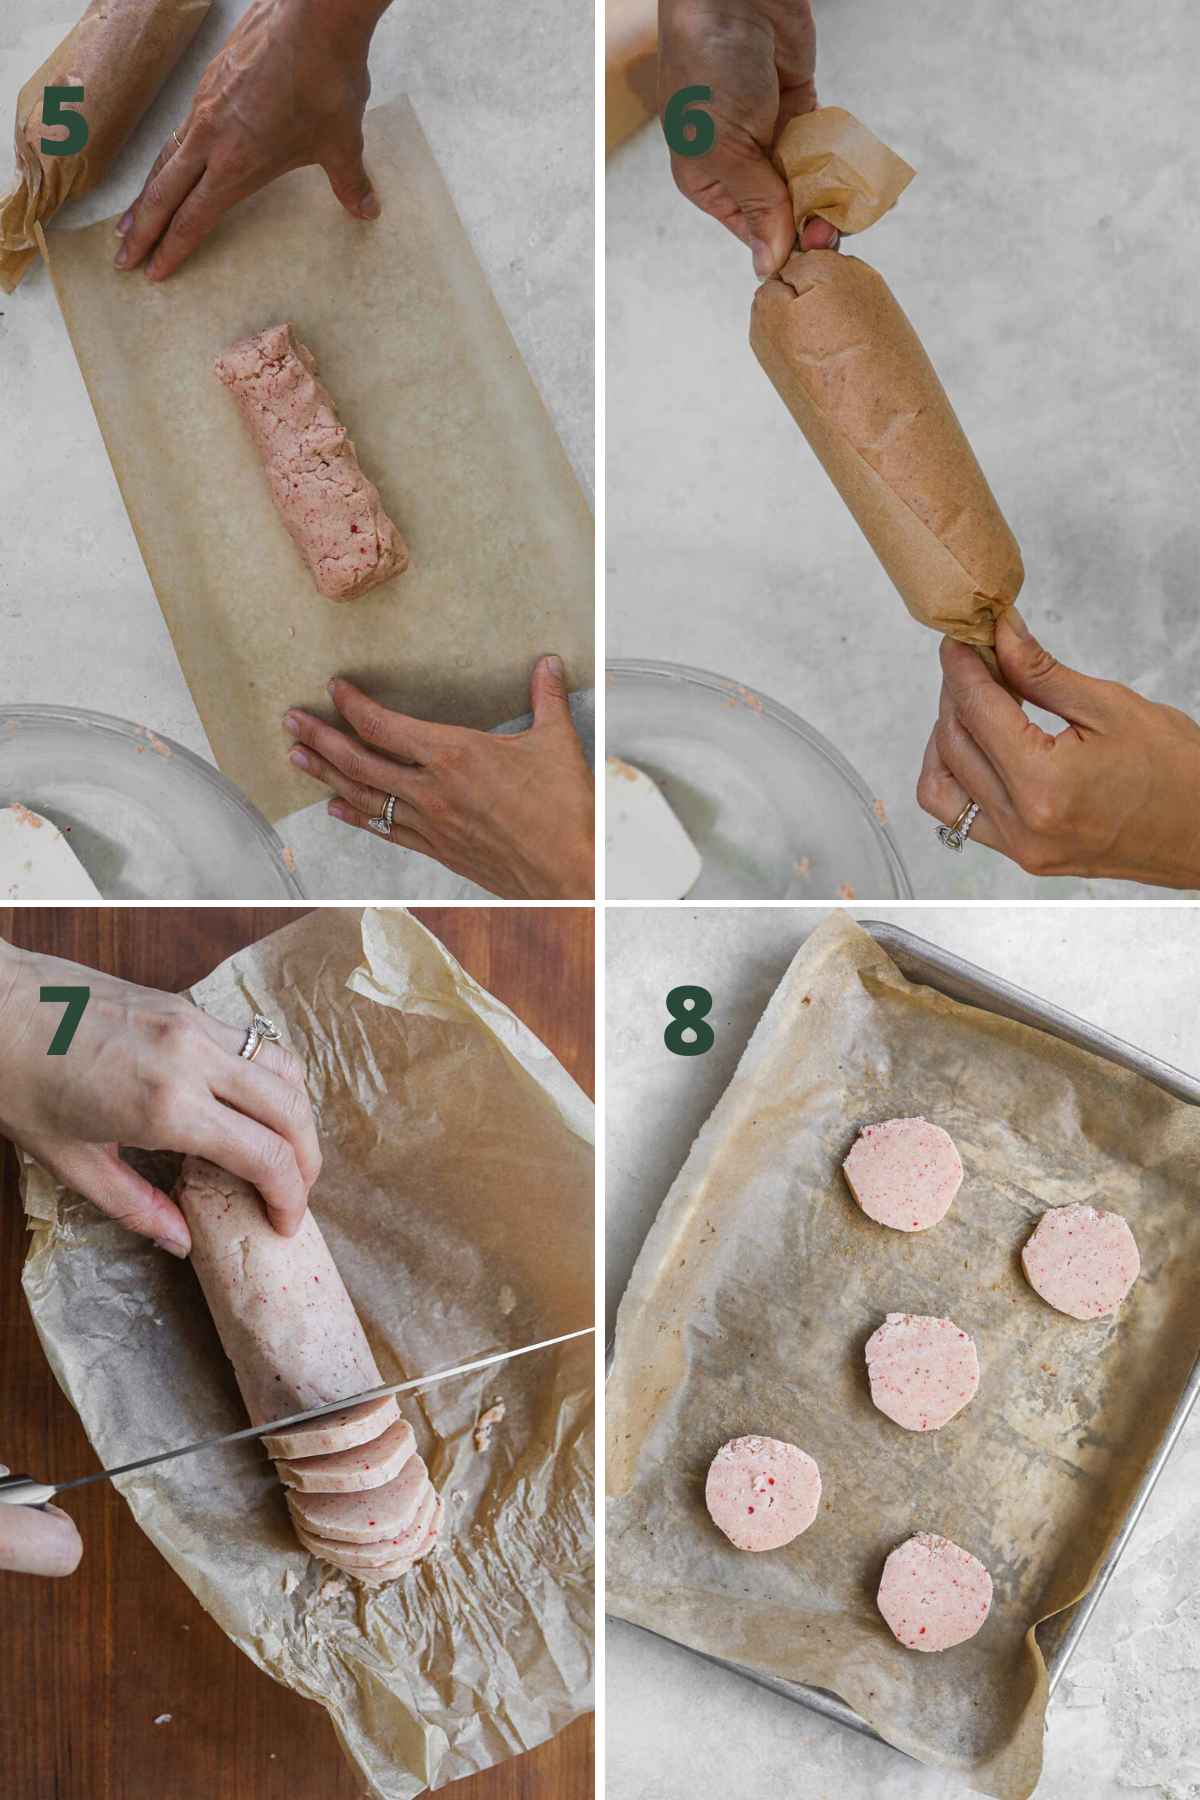 Steps to make strawberry lemonade shortbread cookies, including forming dough into logs in parchment paper, chilling, slicing, and baking.